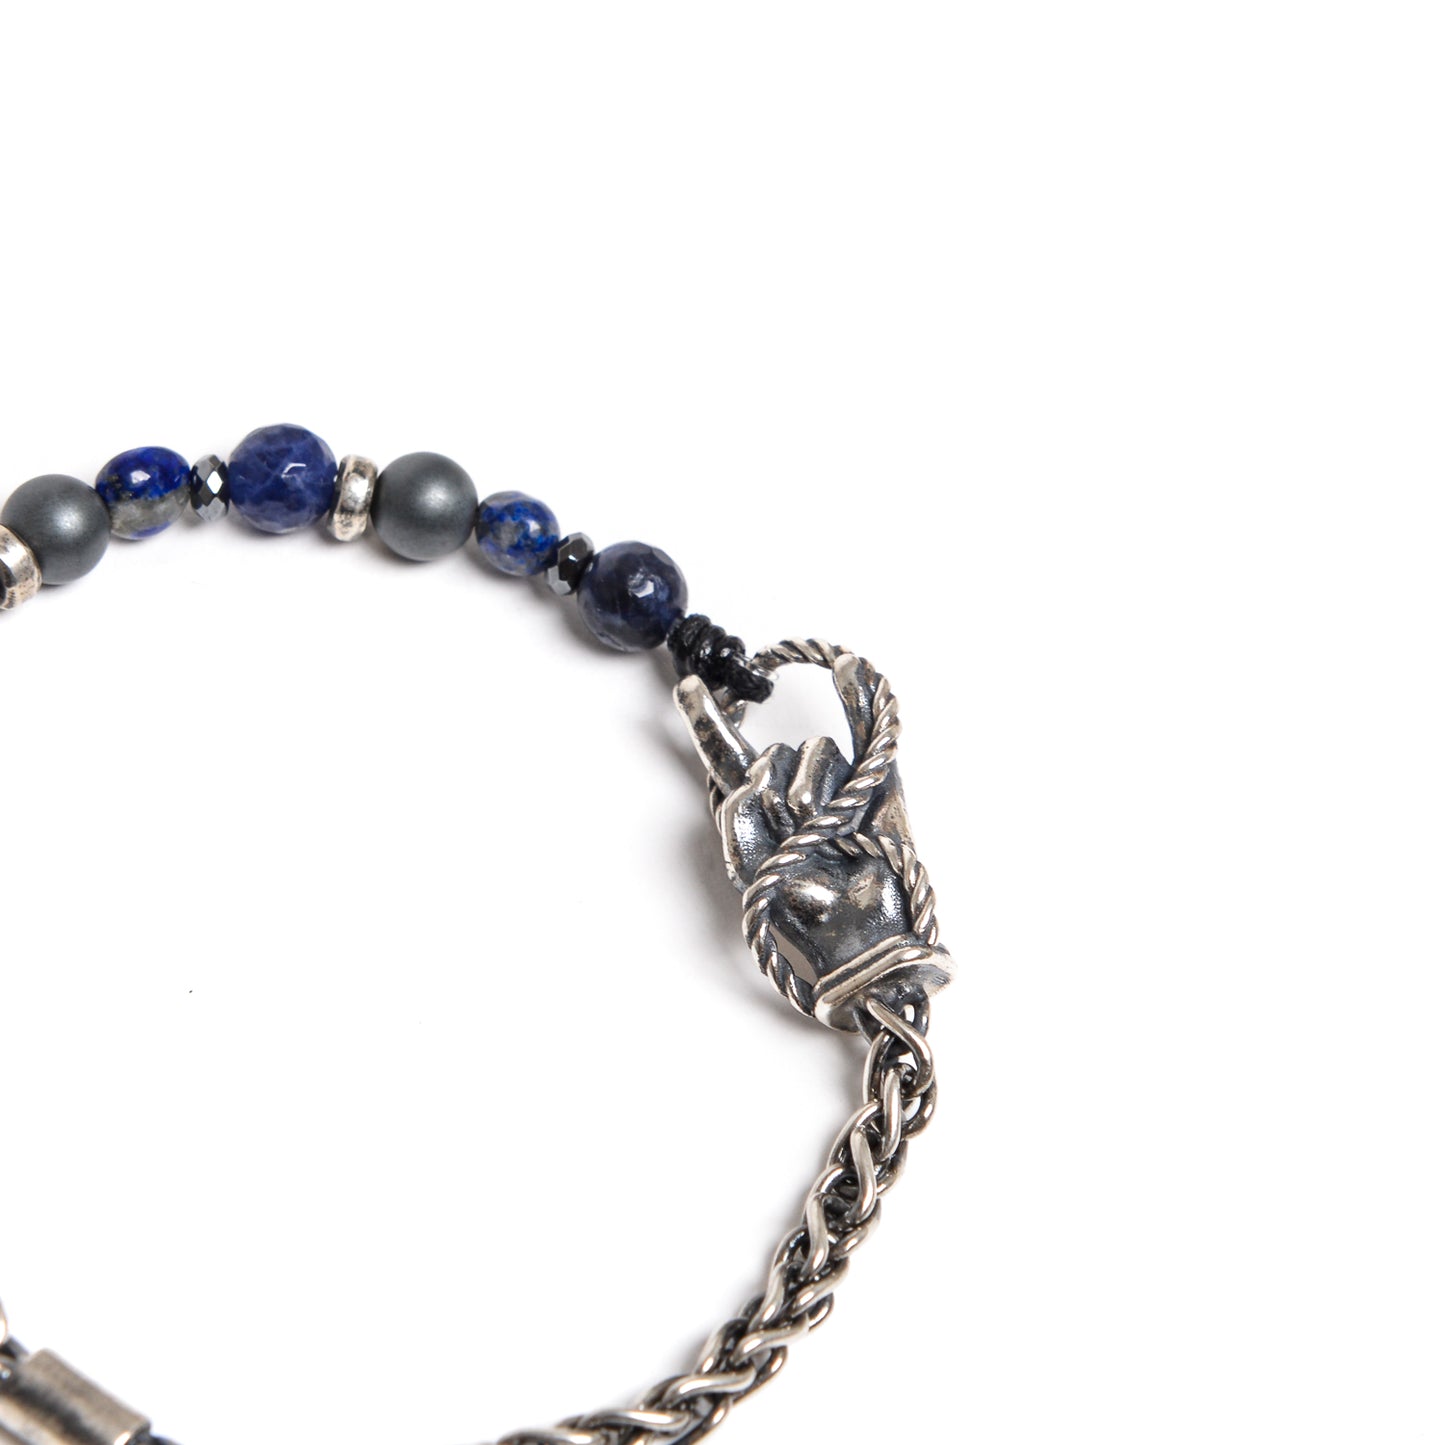 Fusion Blue and "Horn" Chain Bracelet